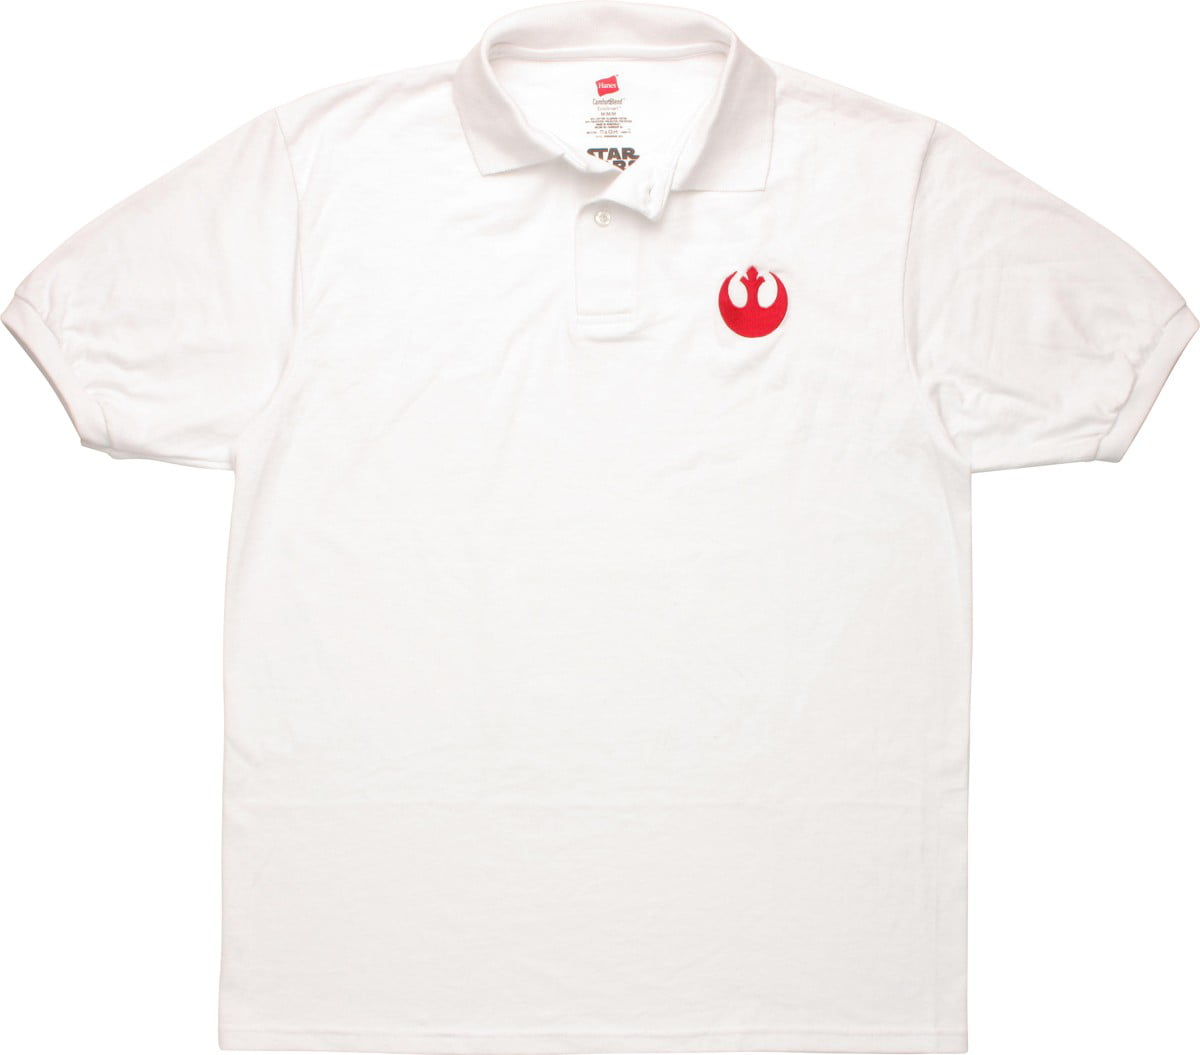 Star Wars X-Wing Red Rebel Polo Shirt